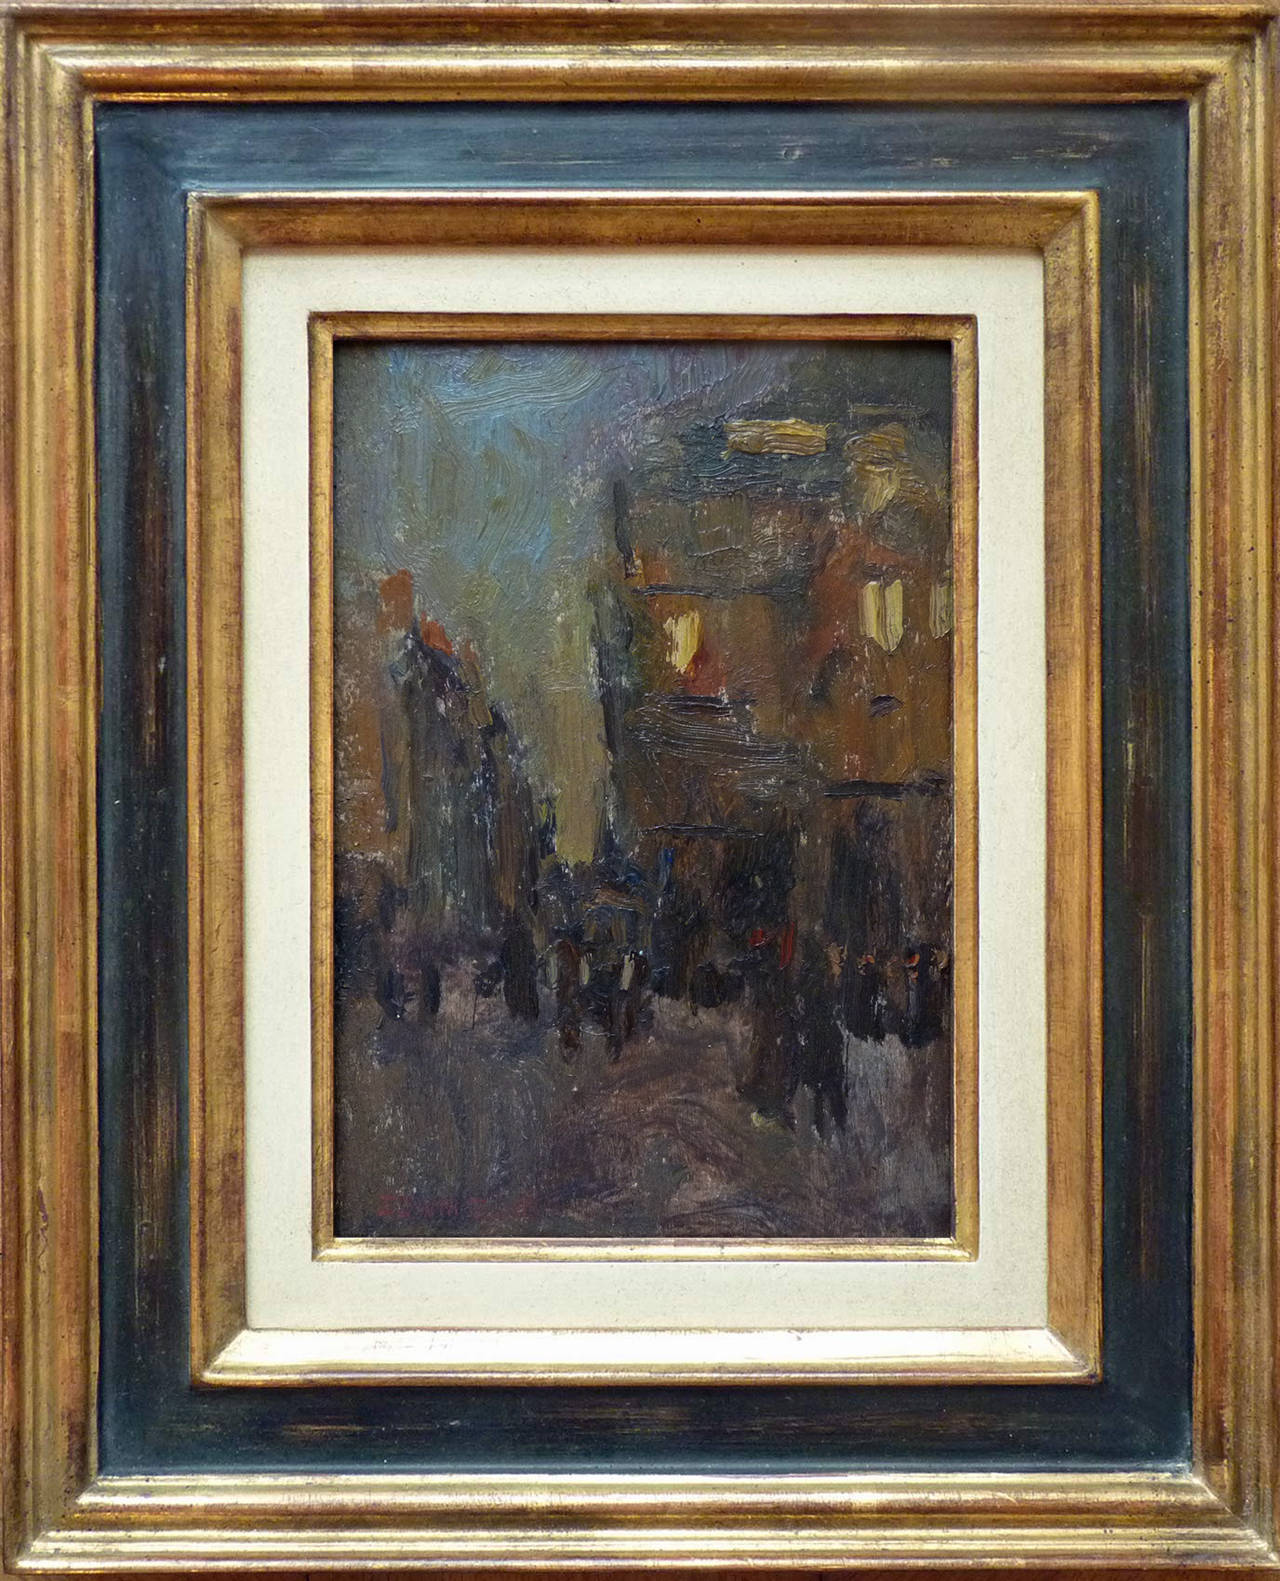 Paris City View in the Evening - Post-impressionism artwork - Painting by Frank Edwin Scott